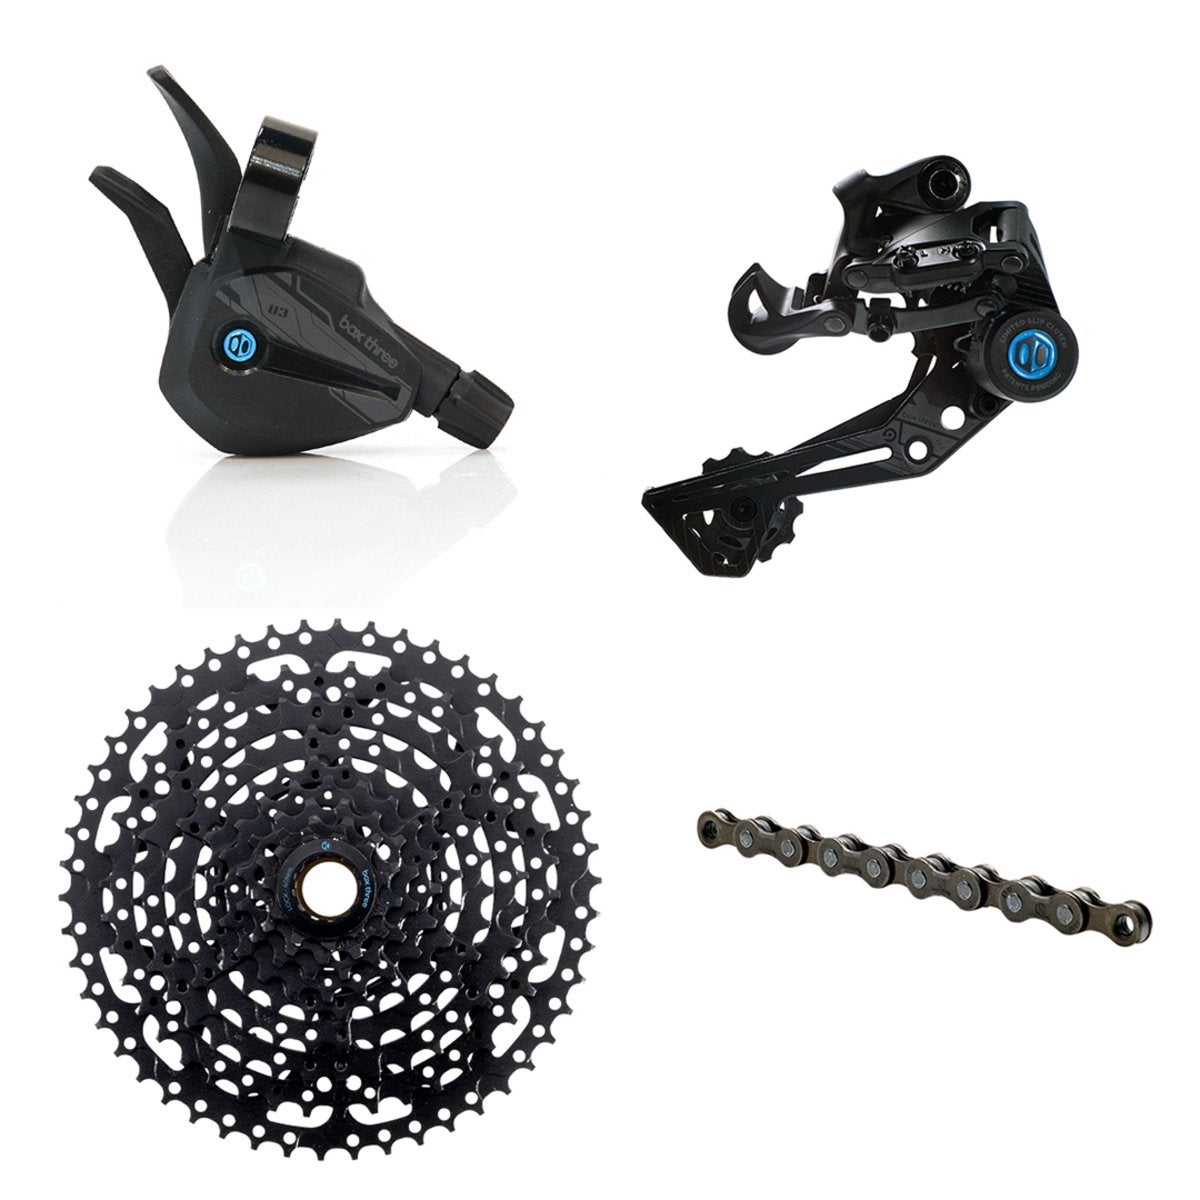 Looking for a good Derailleur / Casette and shifter any suggestions?